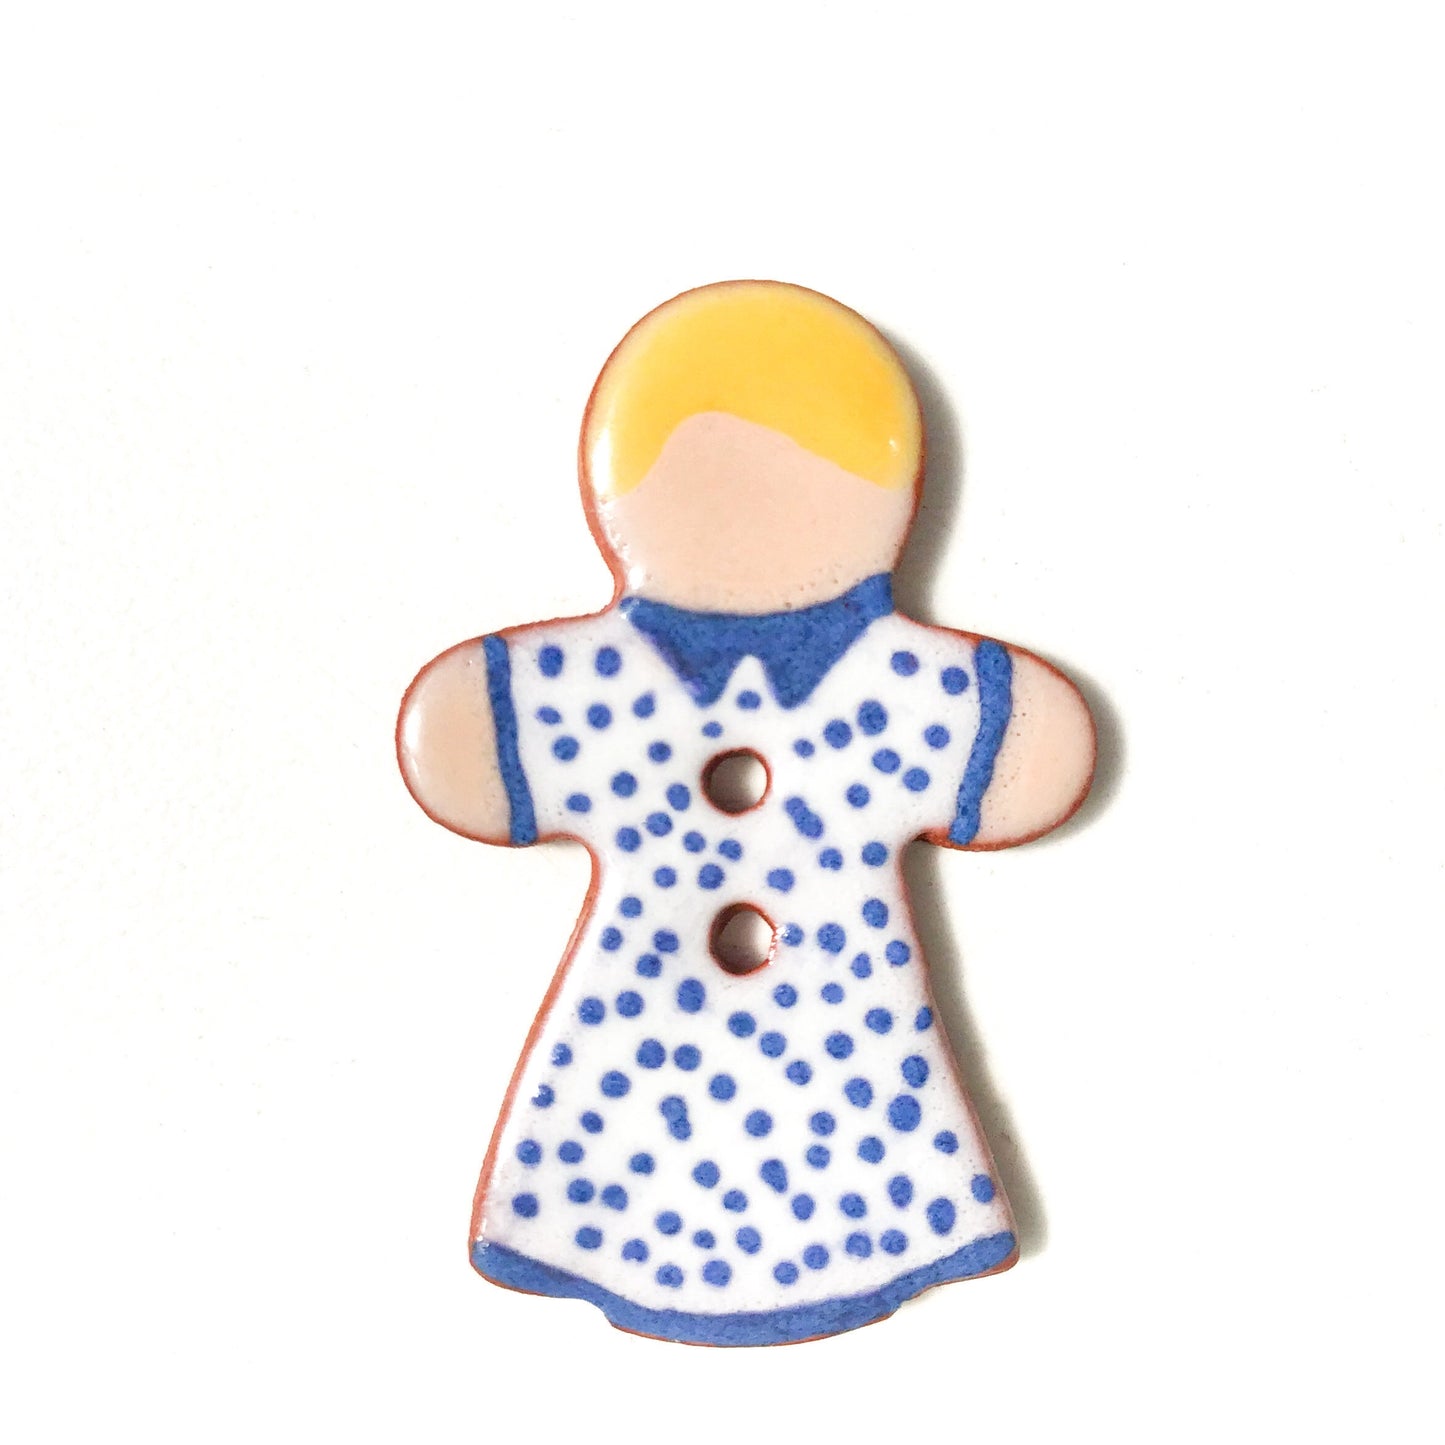 Little Wee Folk Buttons - Waldorf Inspired Ceramic Buttons - 1" x 1 3/8"